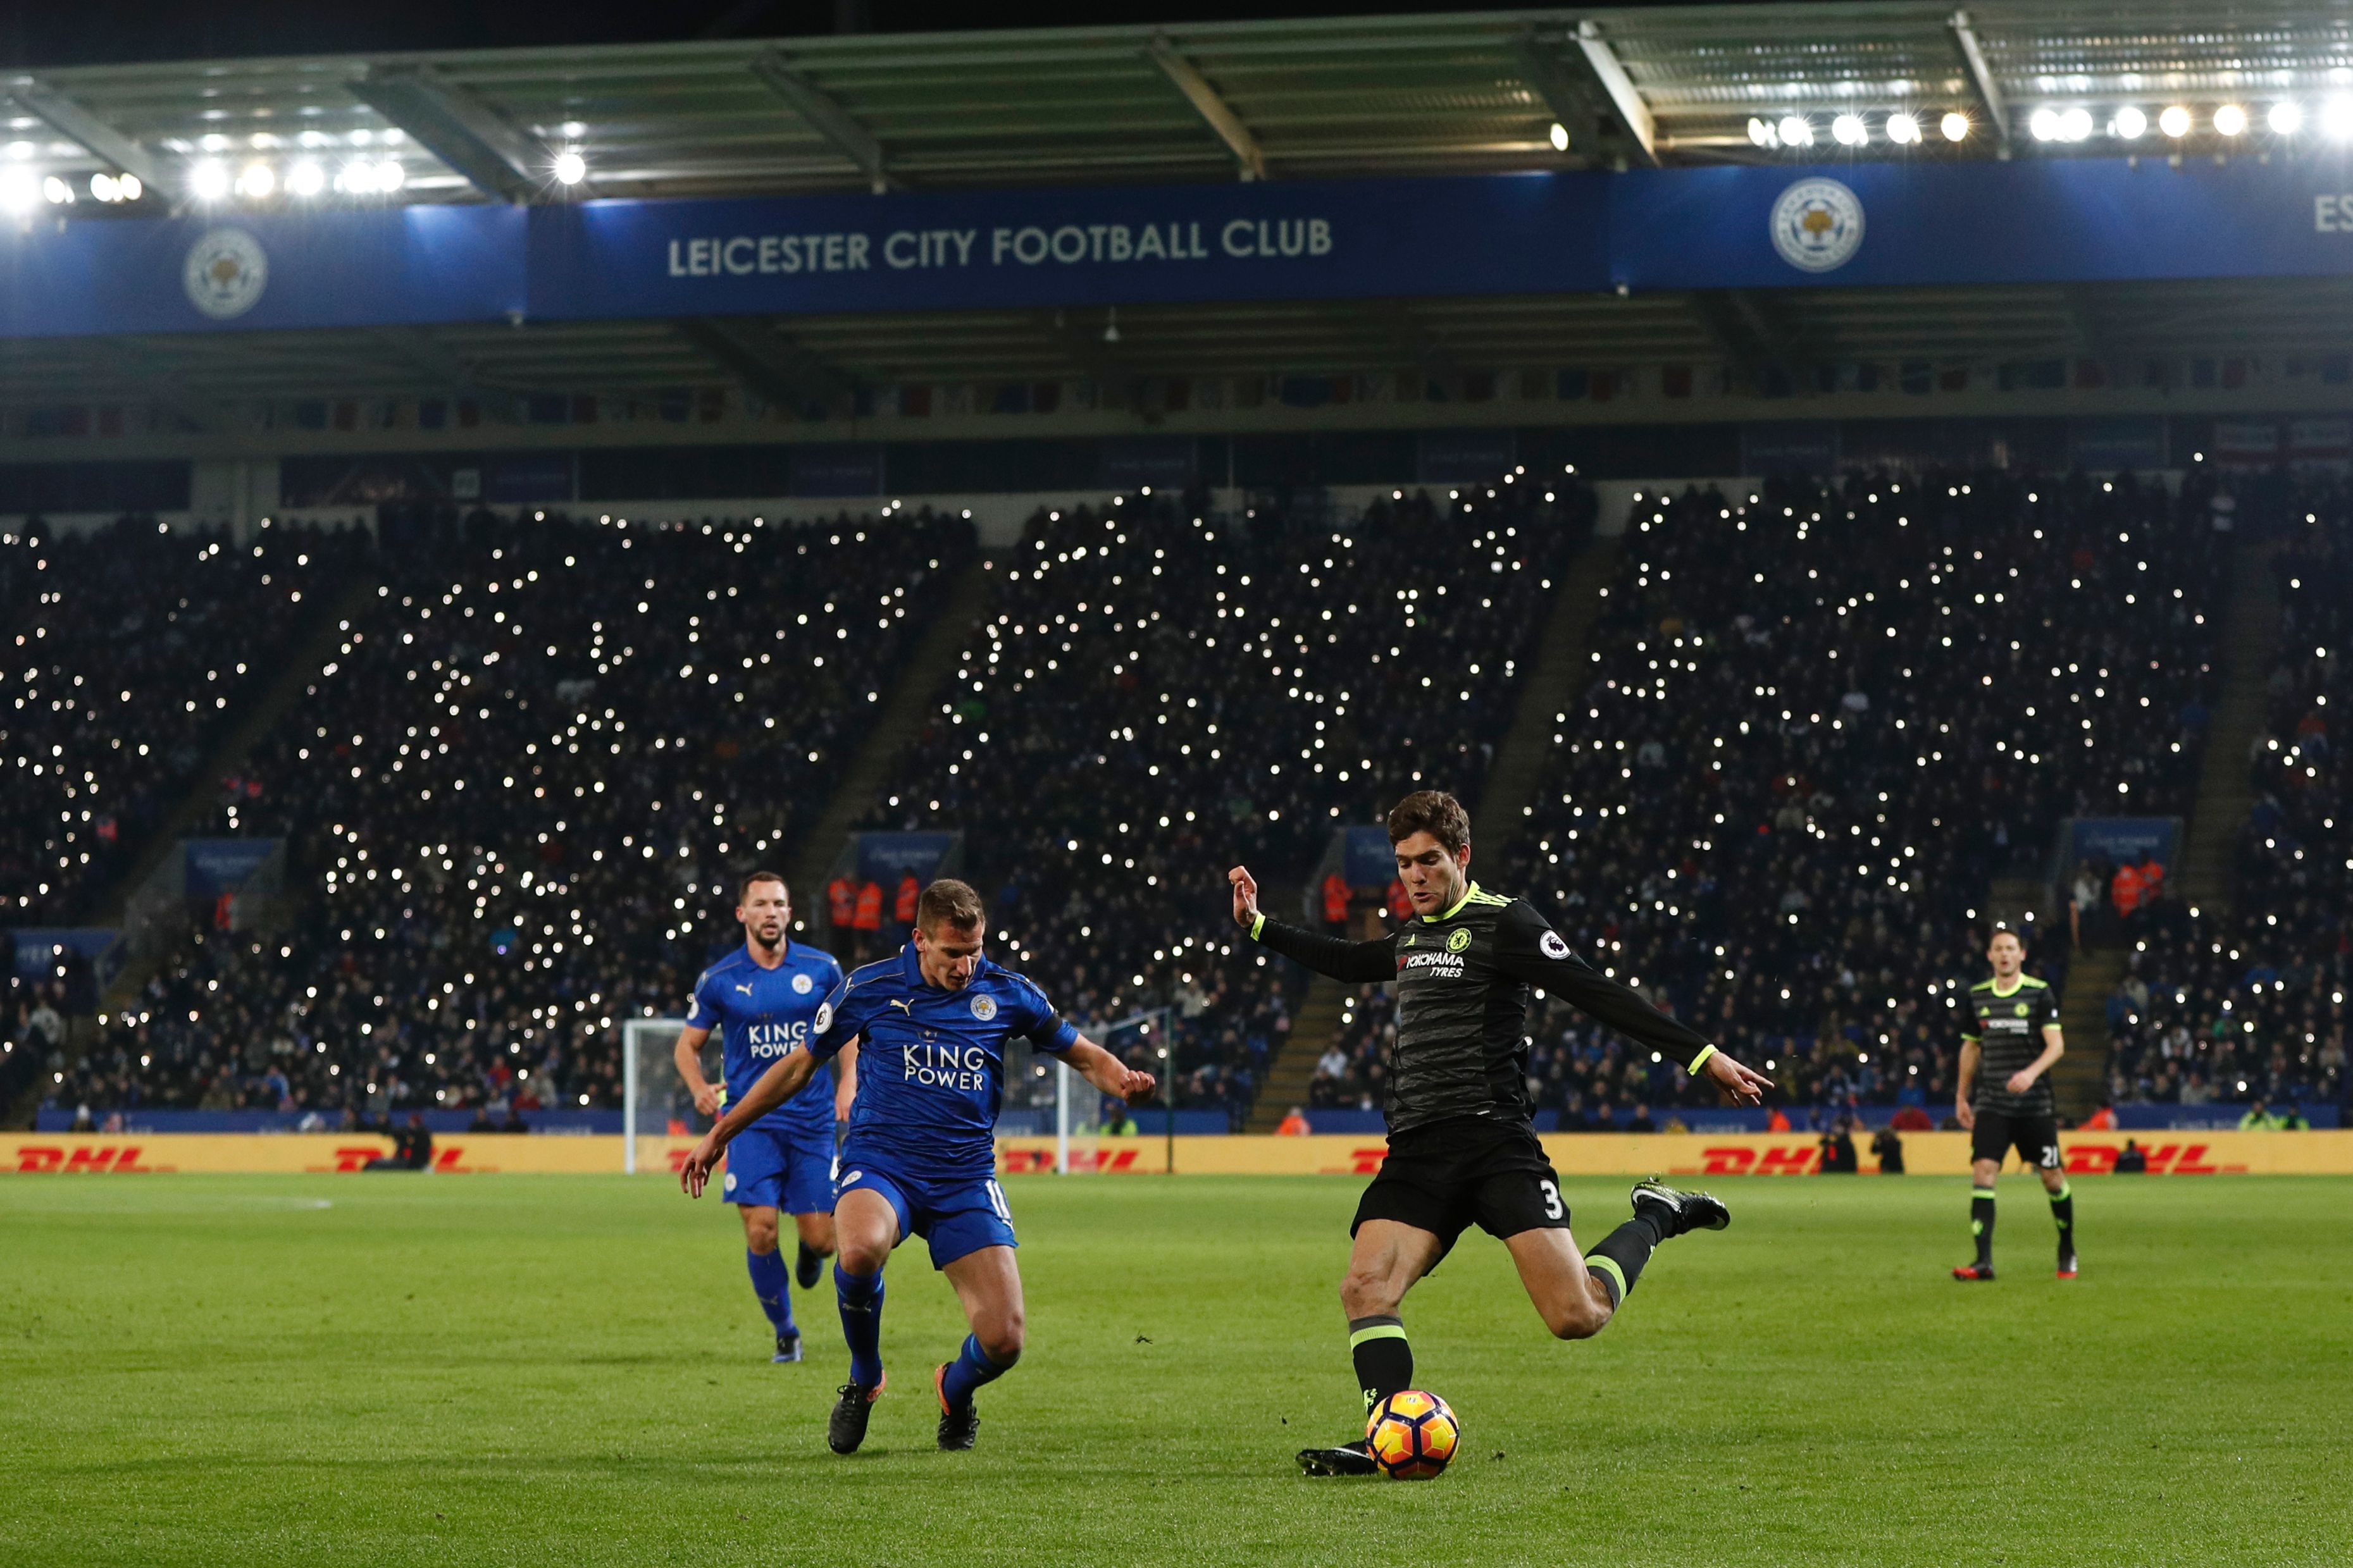 Leicester City's fans shine their mobile phones as lights in support of former player Alan Birchenall, who was taken ill earlier this week, during the English Premier League football match between Leicester City and Chelsea at King Power Stadium in Leicester, central England on January 14, 2017. / AFP / Adrian DENNIS / RESTRICTED TO EDITORIAL USE. No use with unauthorized audio, video, data, fixture lists, club/league logos or 'live' services. Online in-match use limited to 75 images, no video emulation. No use in betting, games or single club/league/player publications.  /         (Photo credit should read ADRIAN DENNIS/AFP/Getty Images)